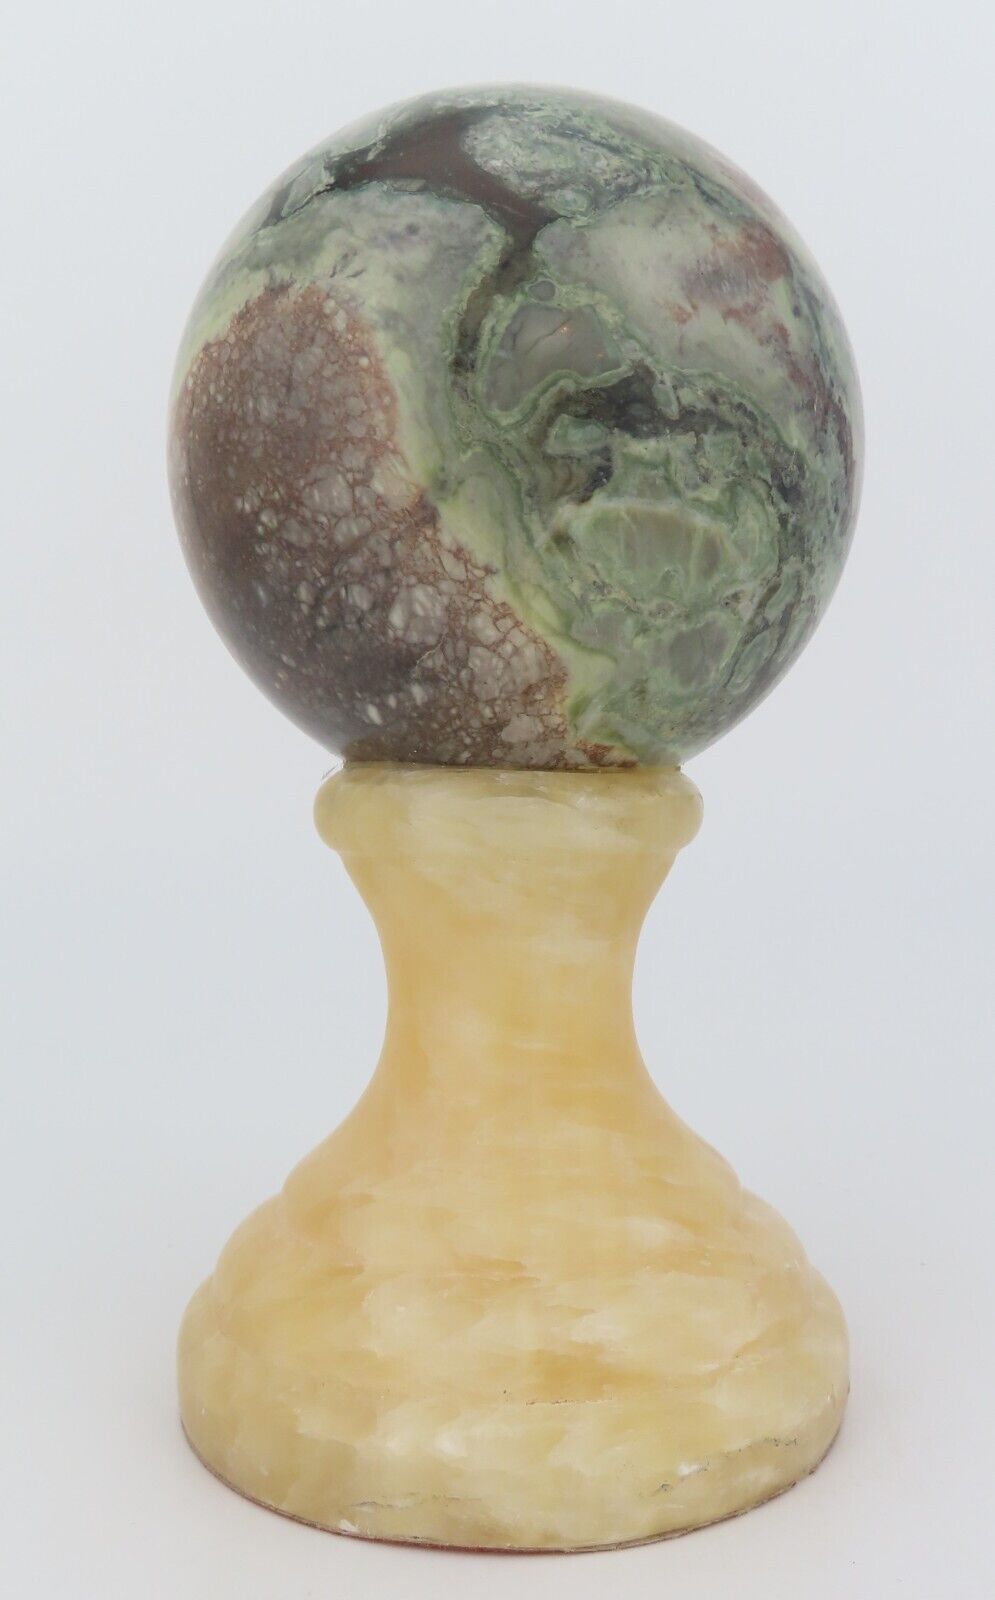 Polished Stone Ball Orb on Stone Base, possible Marble & Onyx stones very pretty